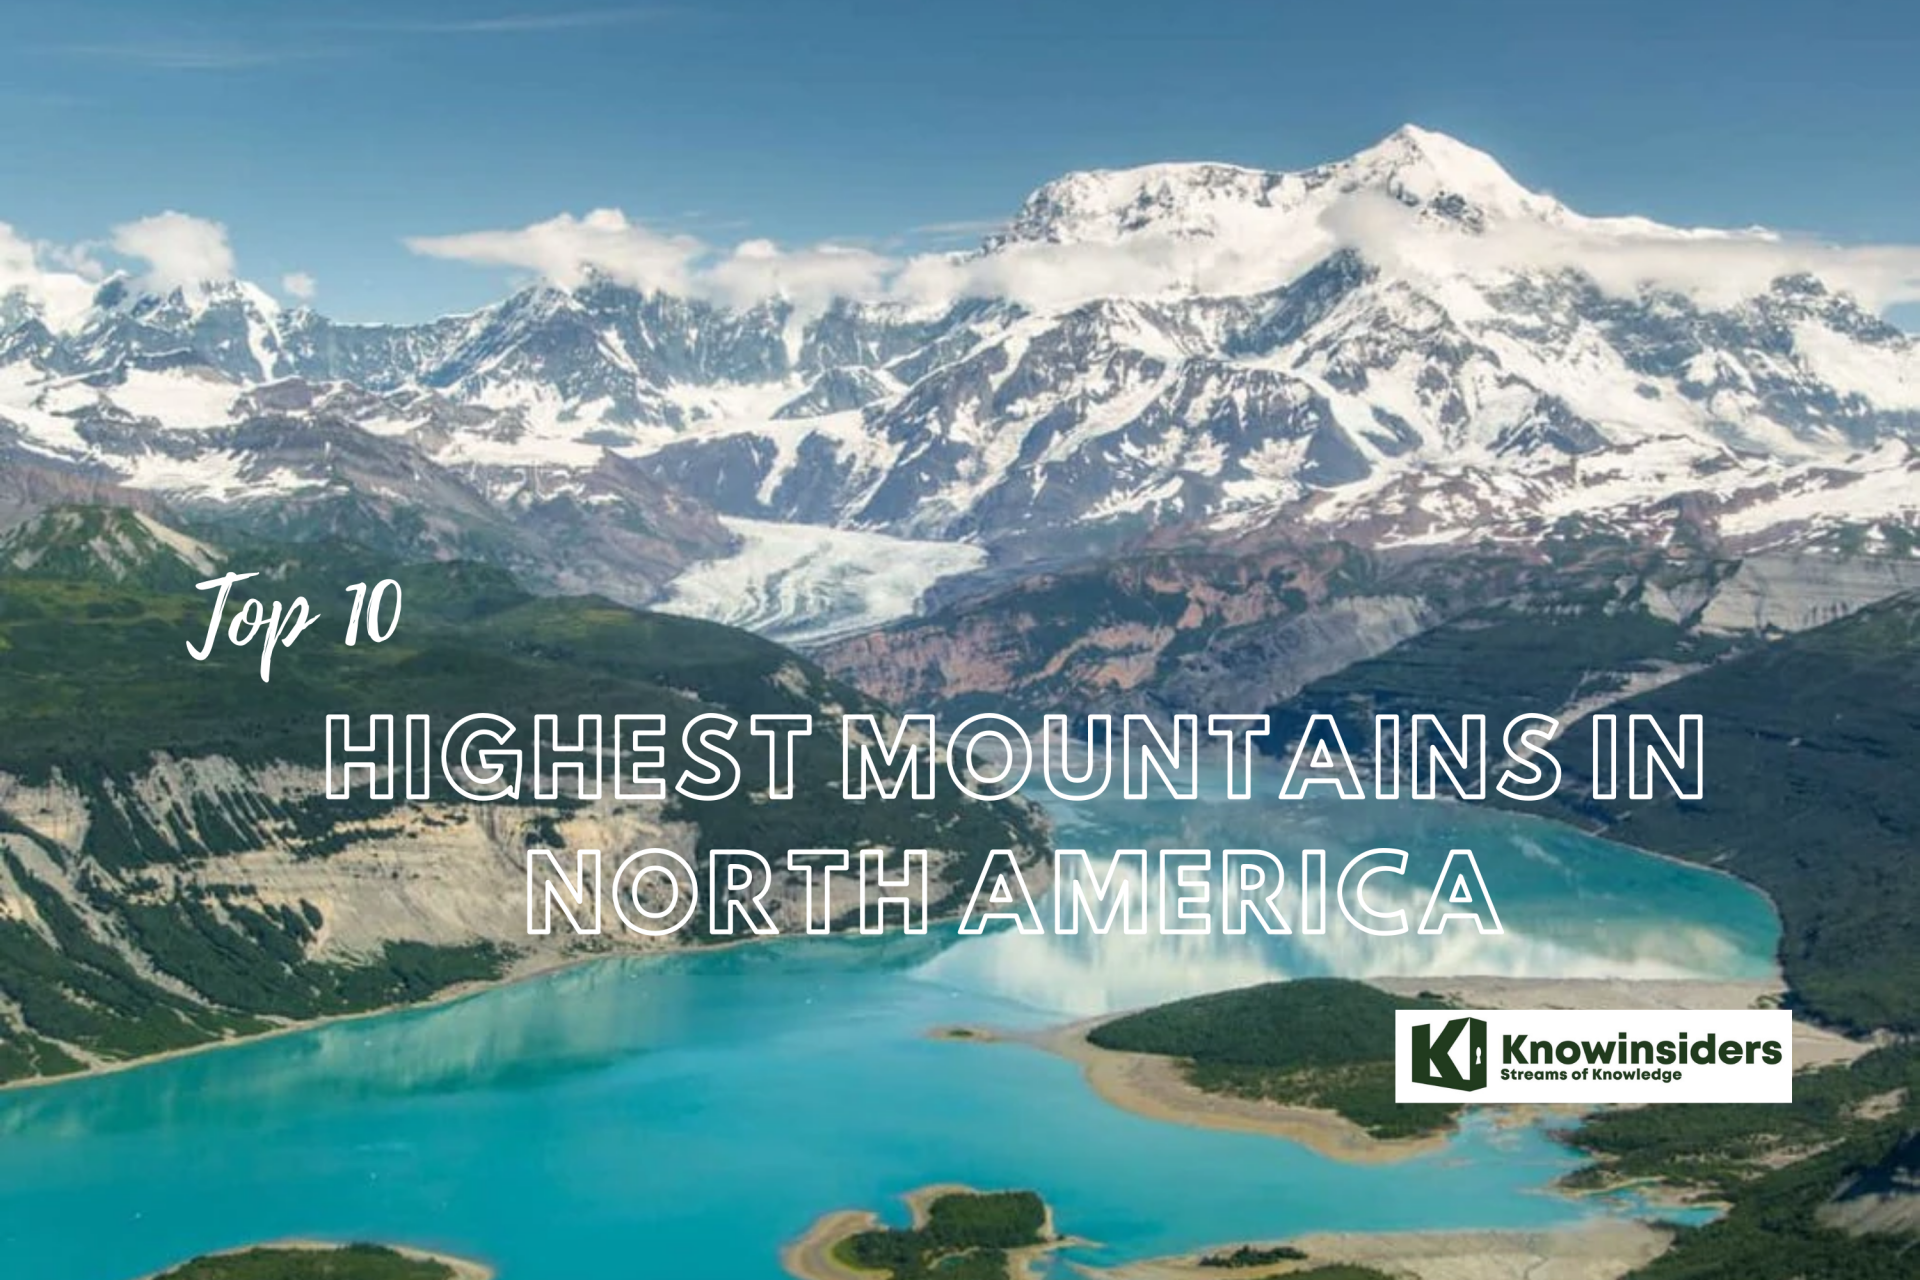 Top 10 Highest Mountains in North America